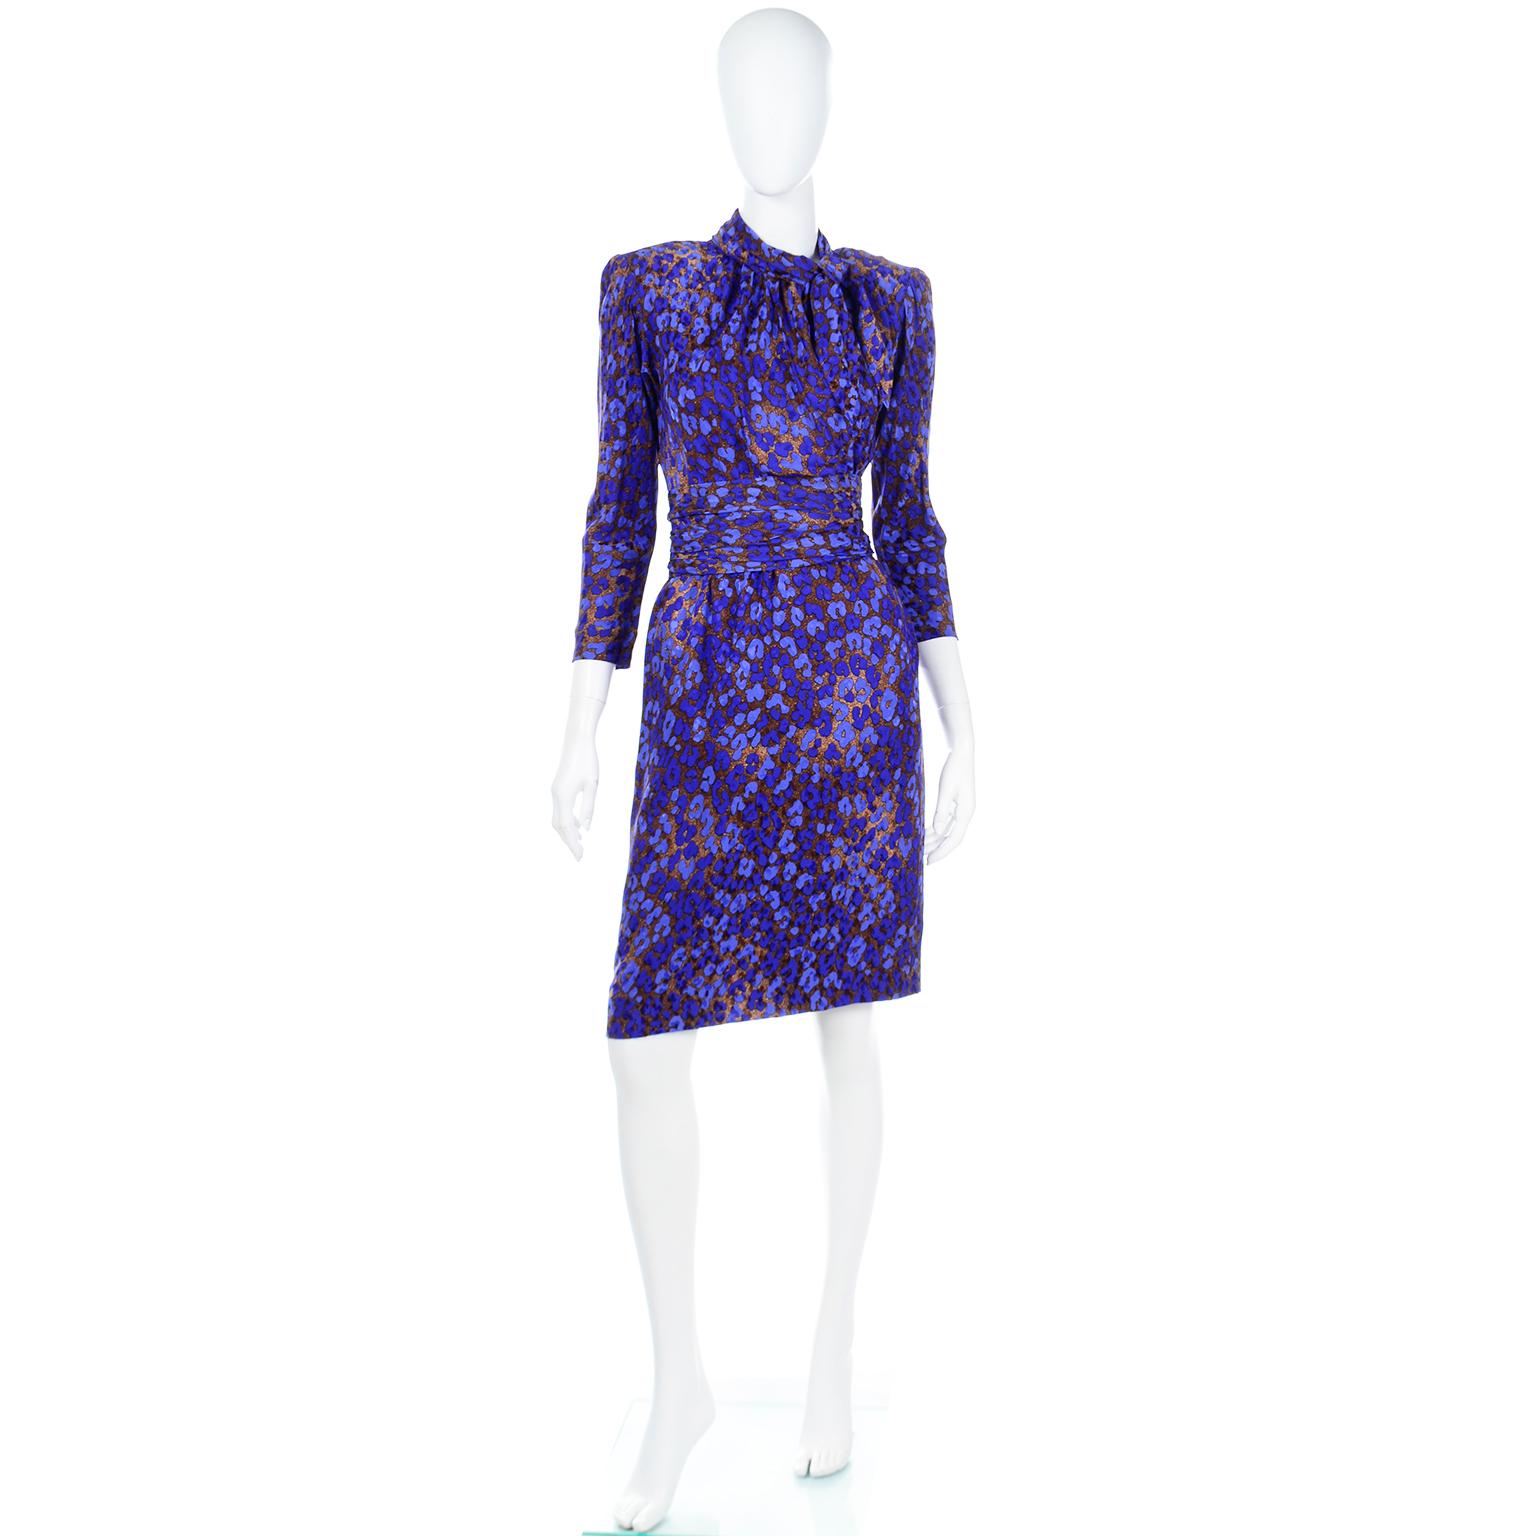 This Yves Saint Laurent 1986 runway documented vintage faux wrap style dress is in a saturated royal blue and copper brown leopard print silk. The skirt portion of the dress is fully lined and there are removable shoulder pads. The dress closes with